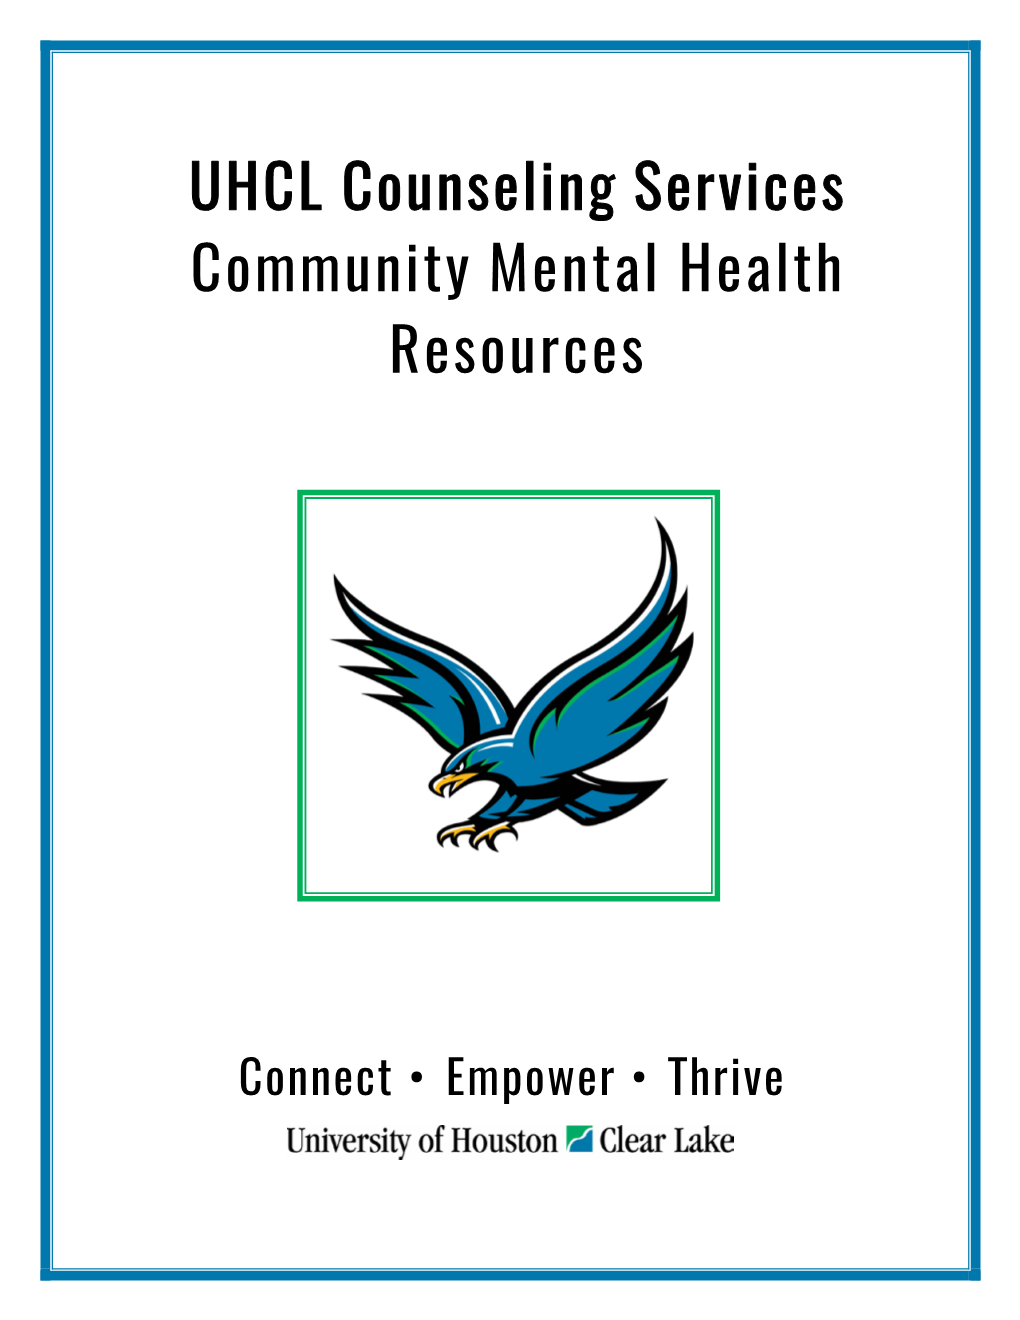 UHCL Counseling Services Community Mental Health Resources